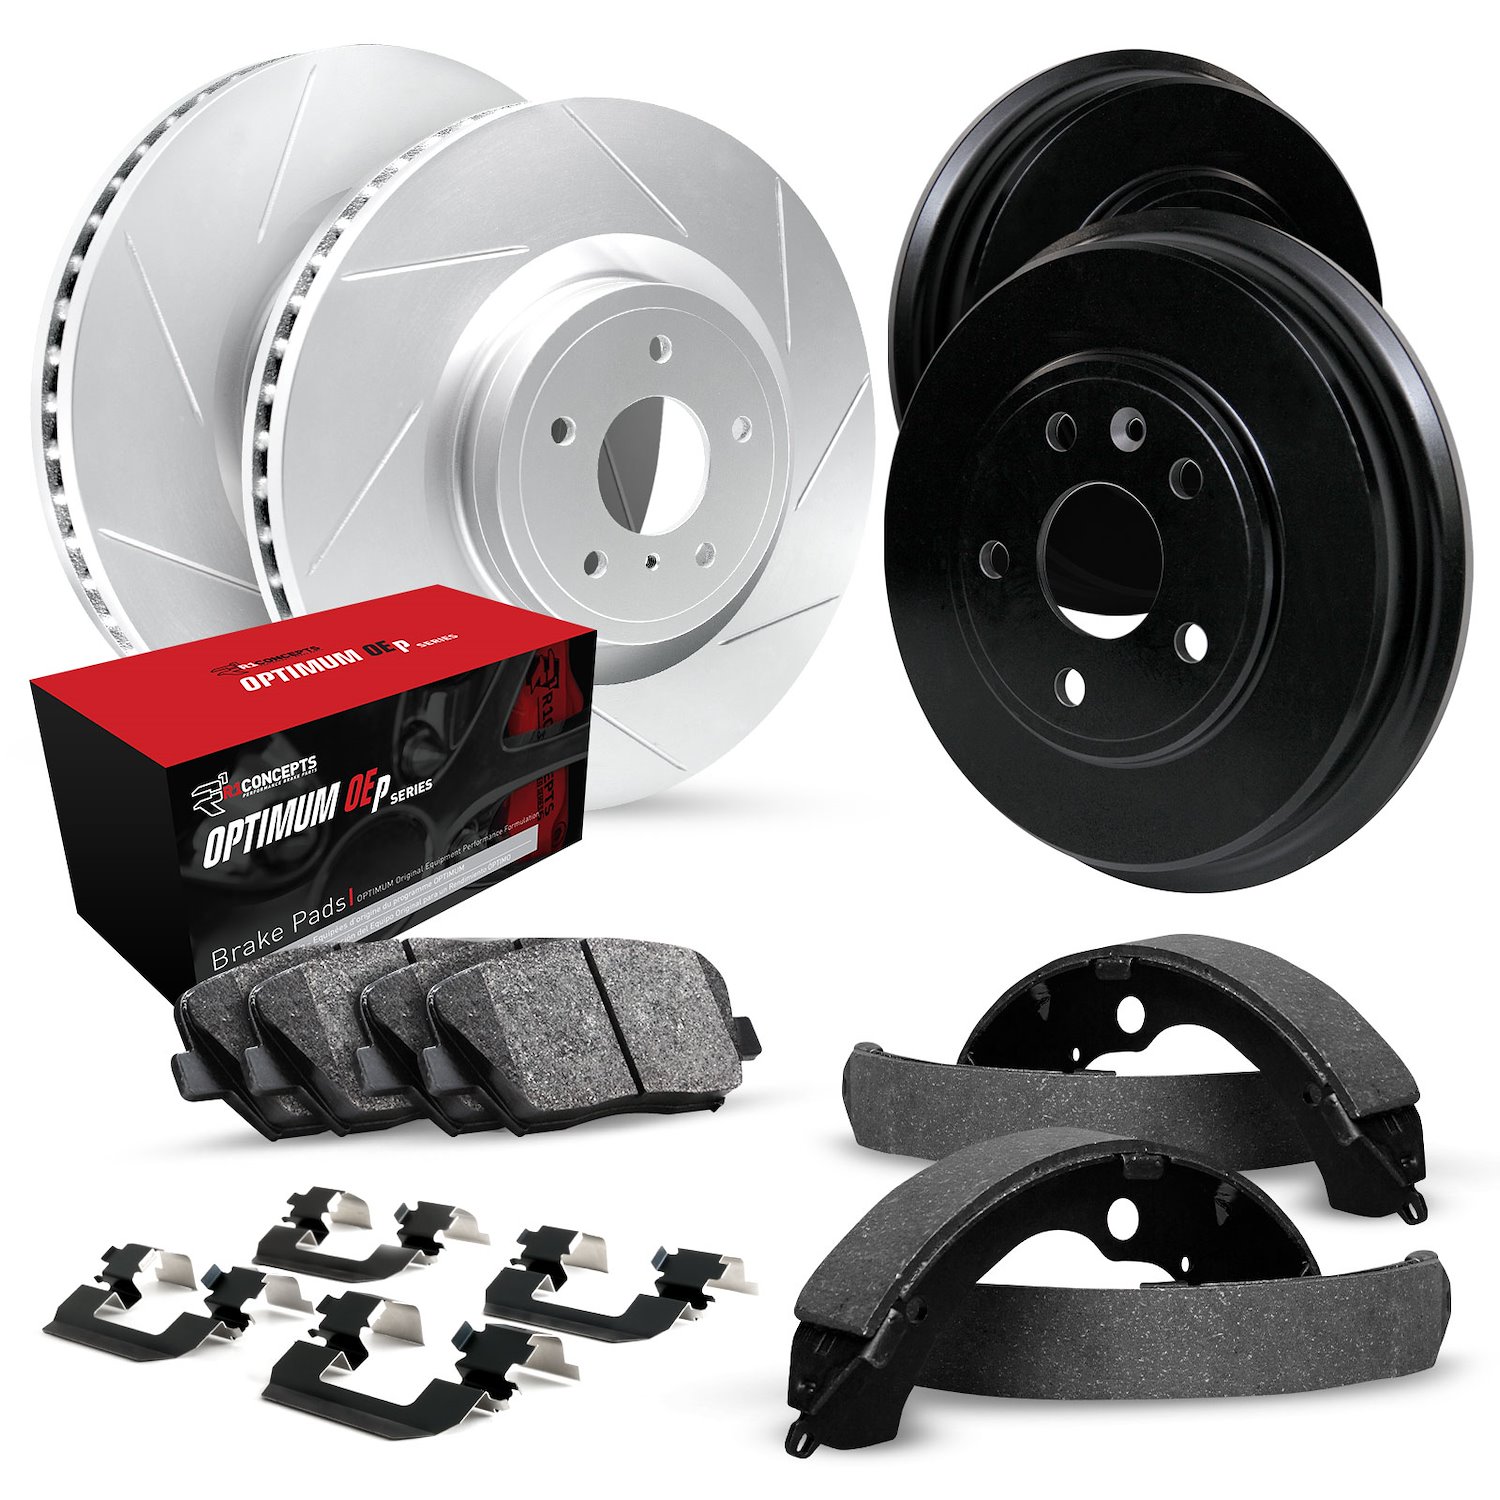 GEO-Carbon Slotted Brake Rotor & Drum Set w/Optimum OE Pads, Shoes, & Hardware, 1993-1997 Ford/Lincoln/Mercury/Mazda